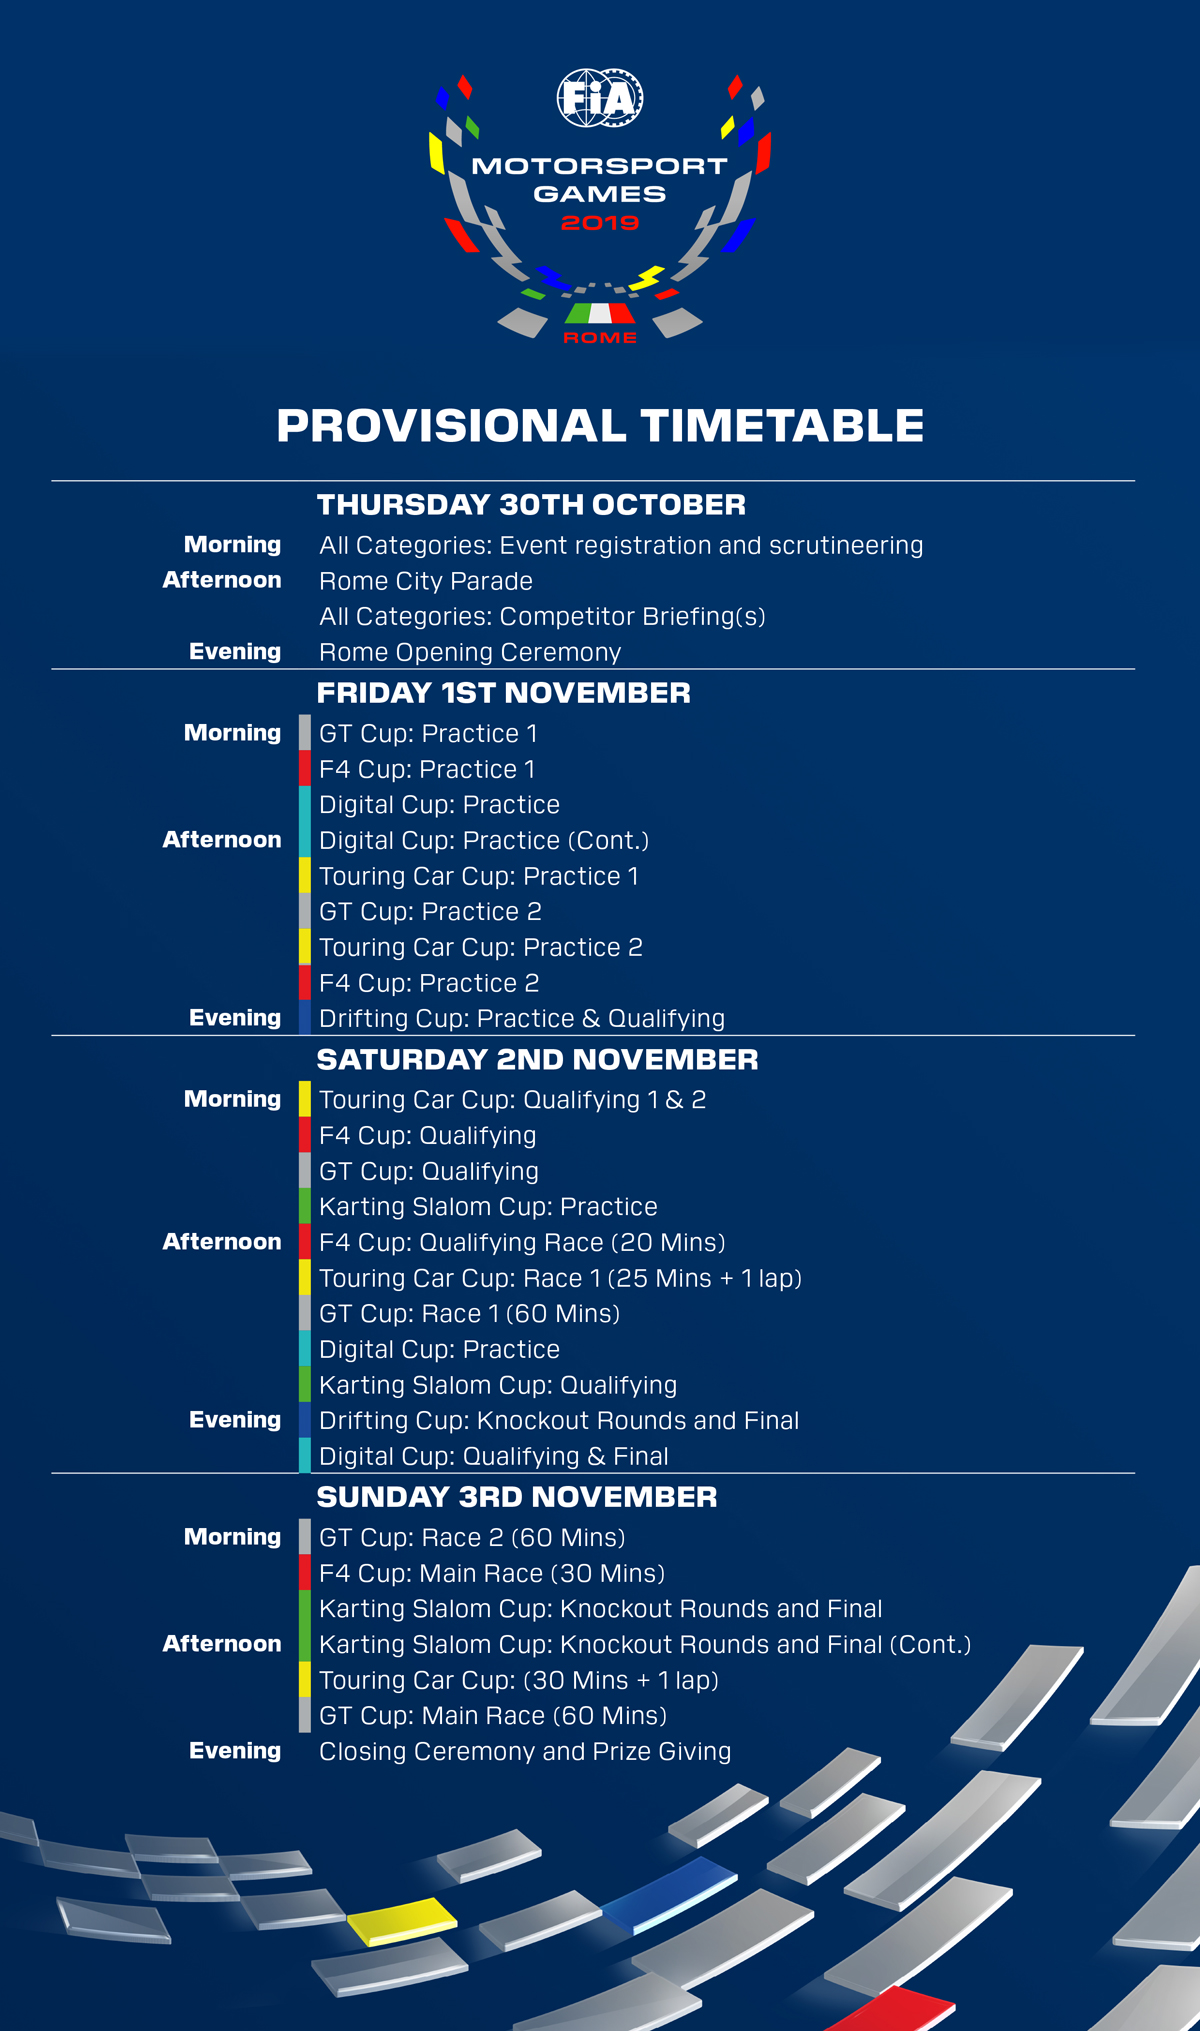 Fia games provisional timetable time and cup